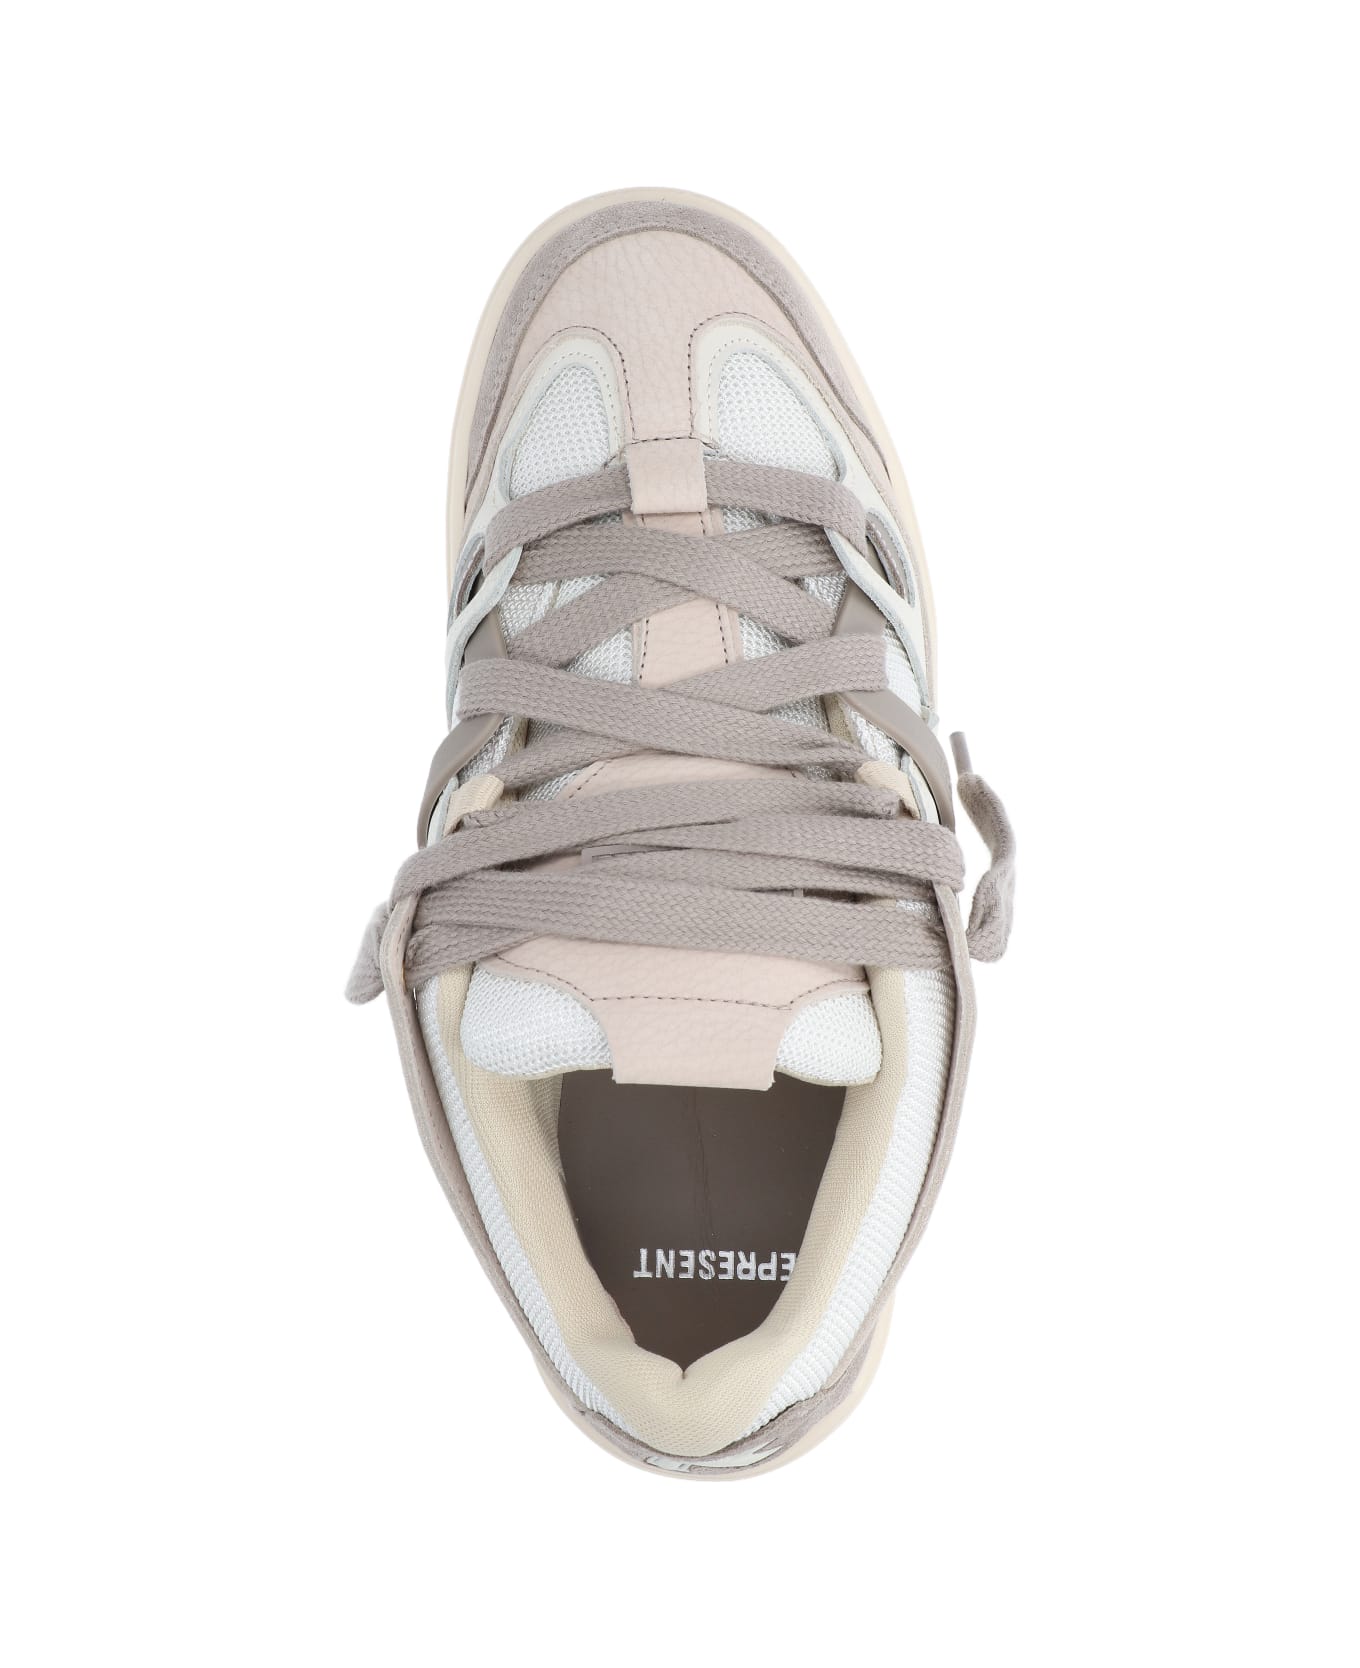 REPRESENT 'bully' Sneakers - Taupe